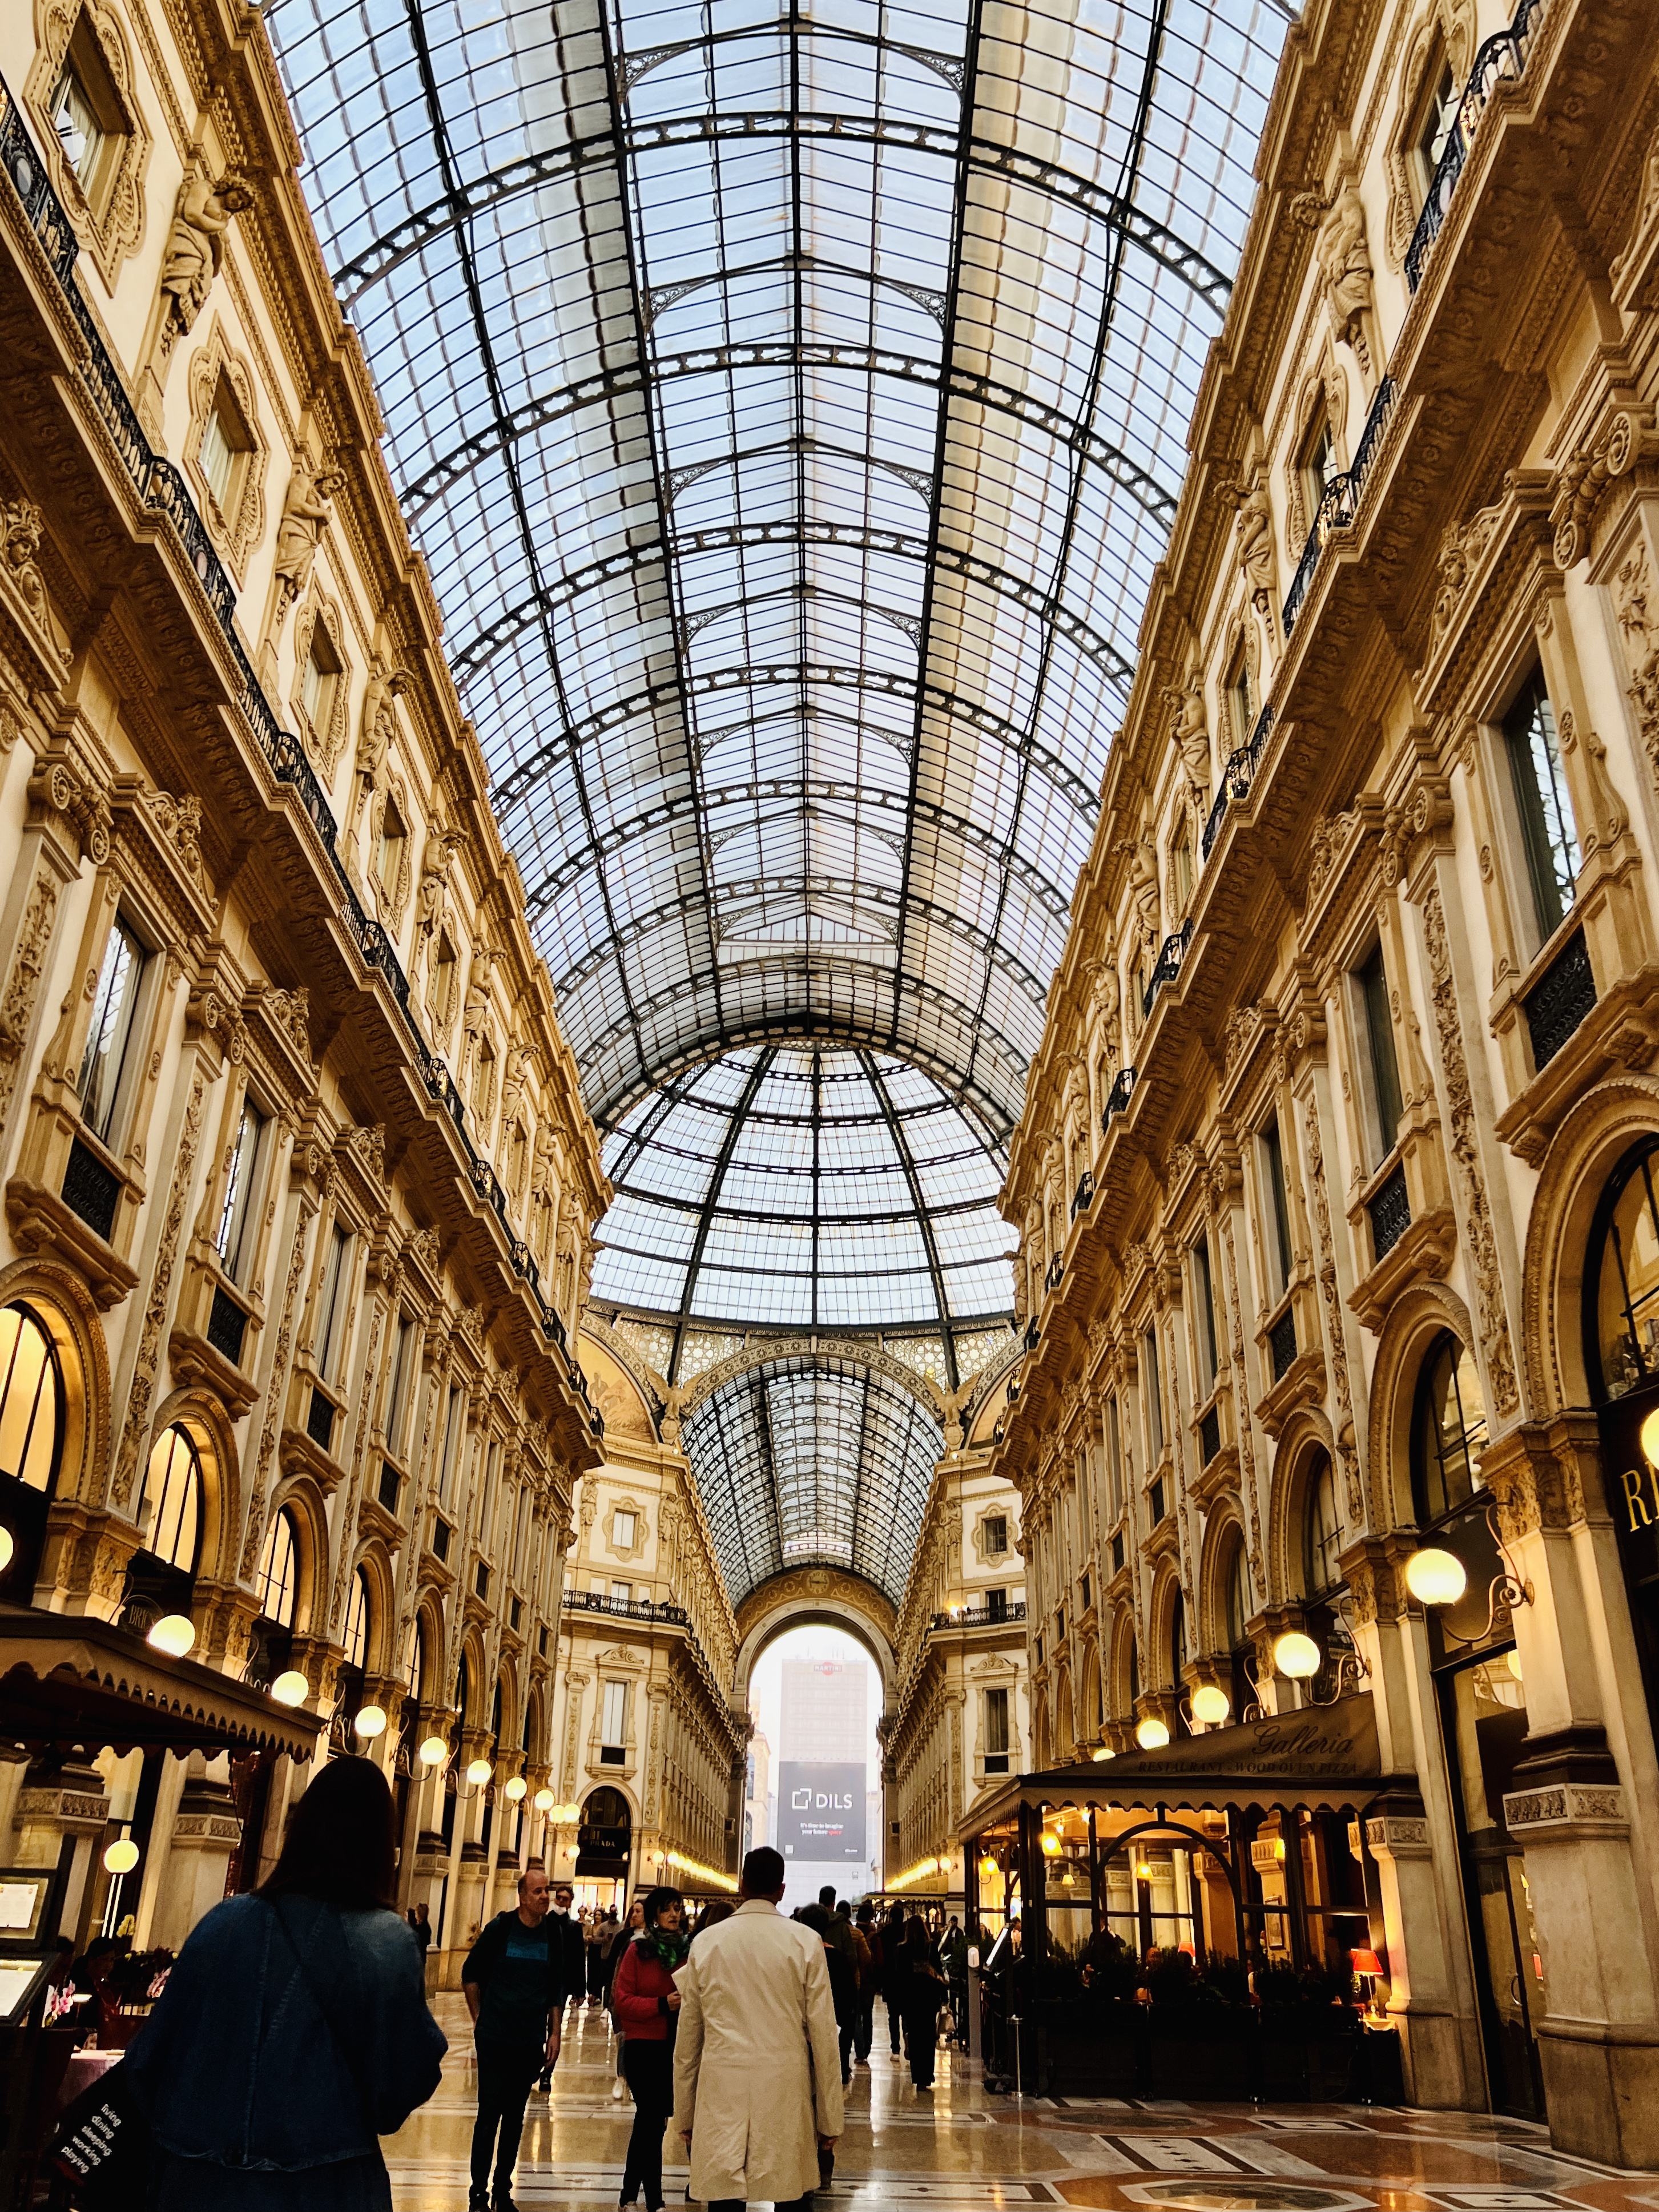 walkway of Galleria Vittorio Emmanuele II in Milan, Northern Italy with a glass roof, lanterns, and golden walls